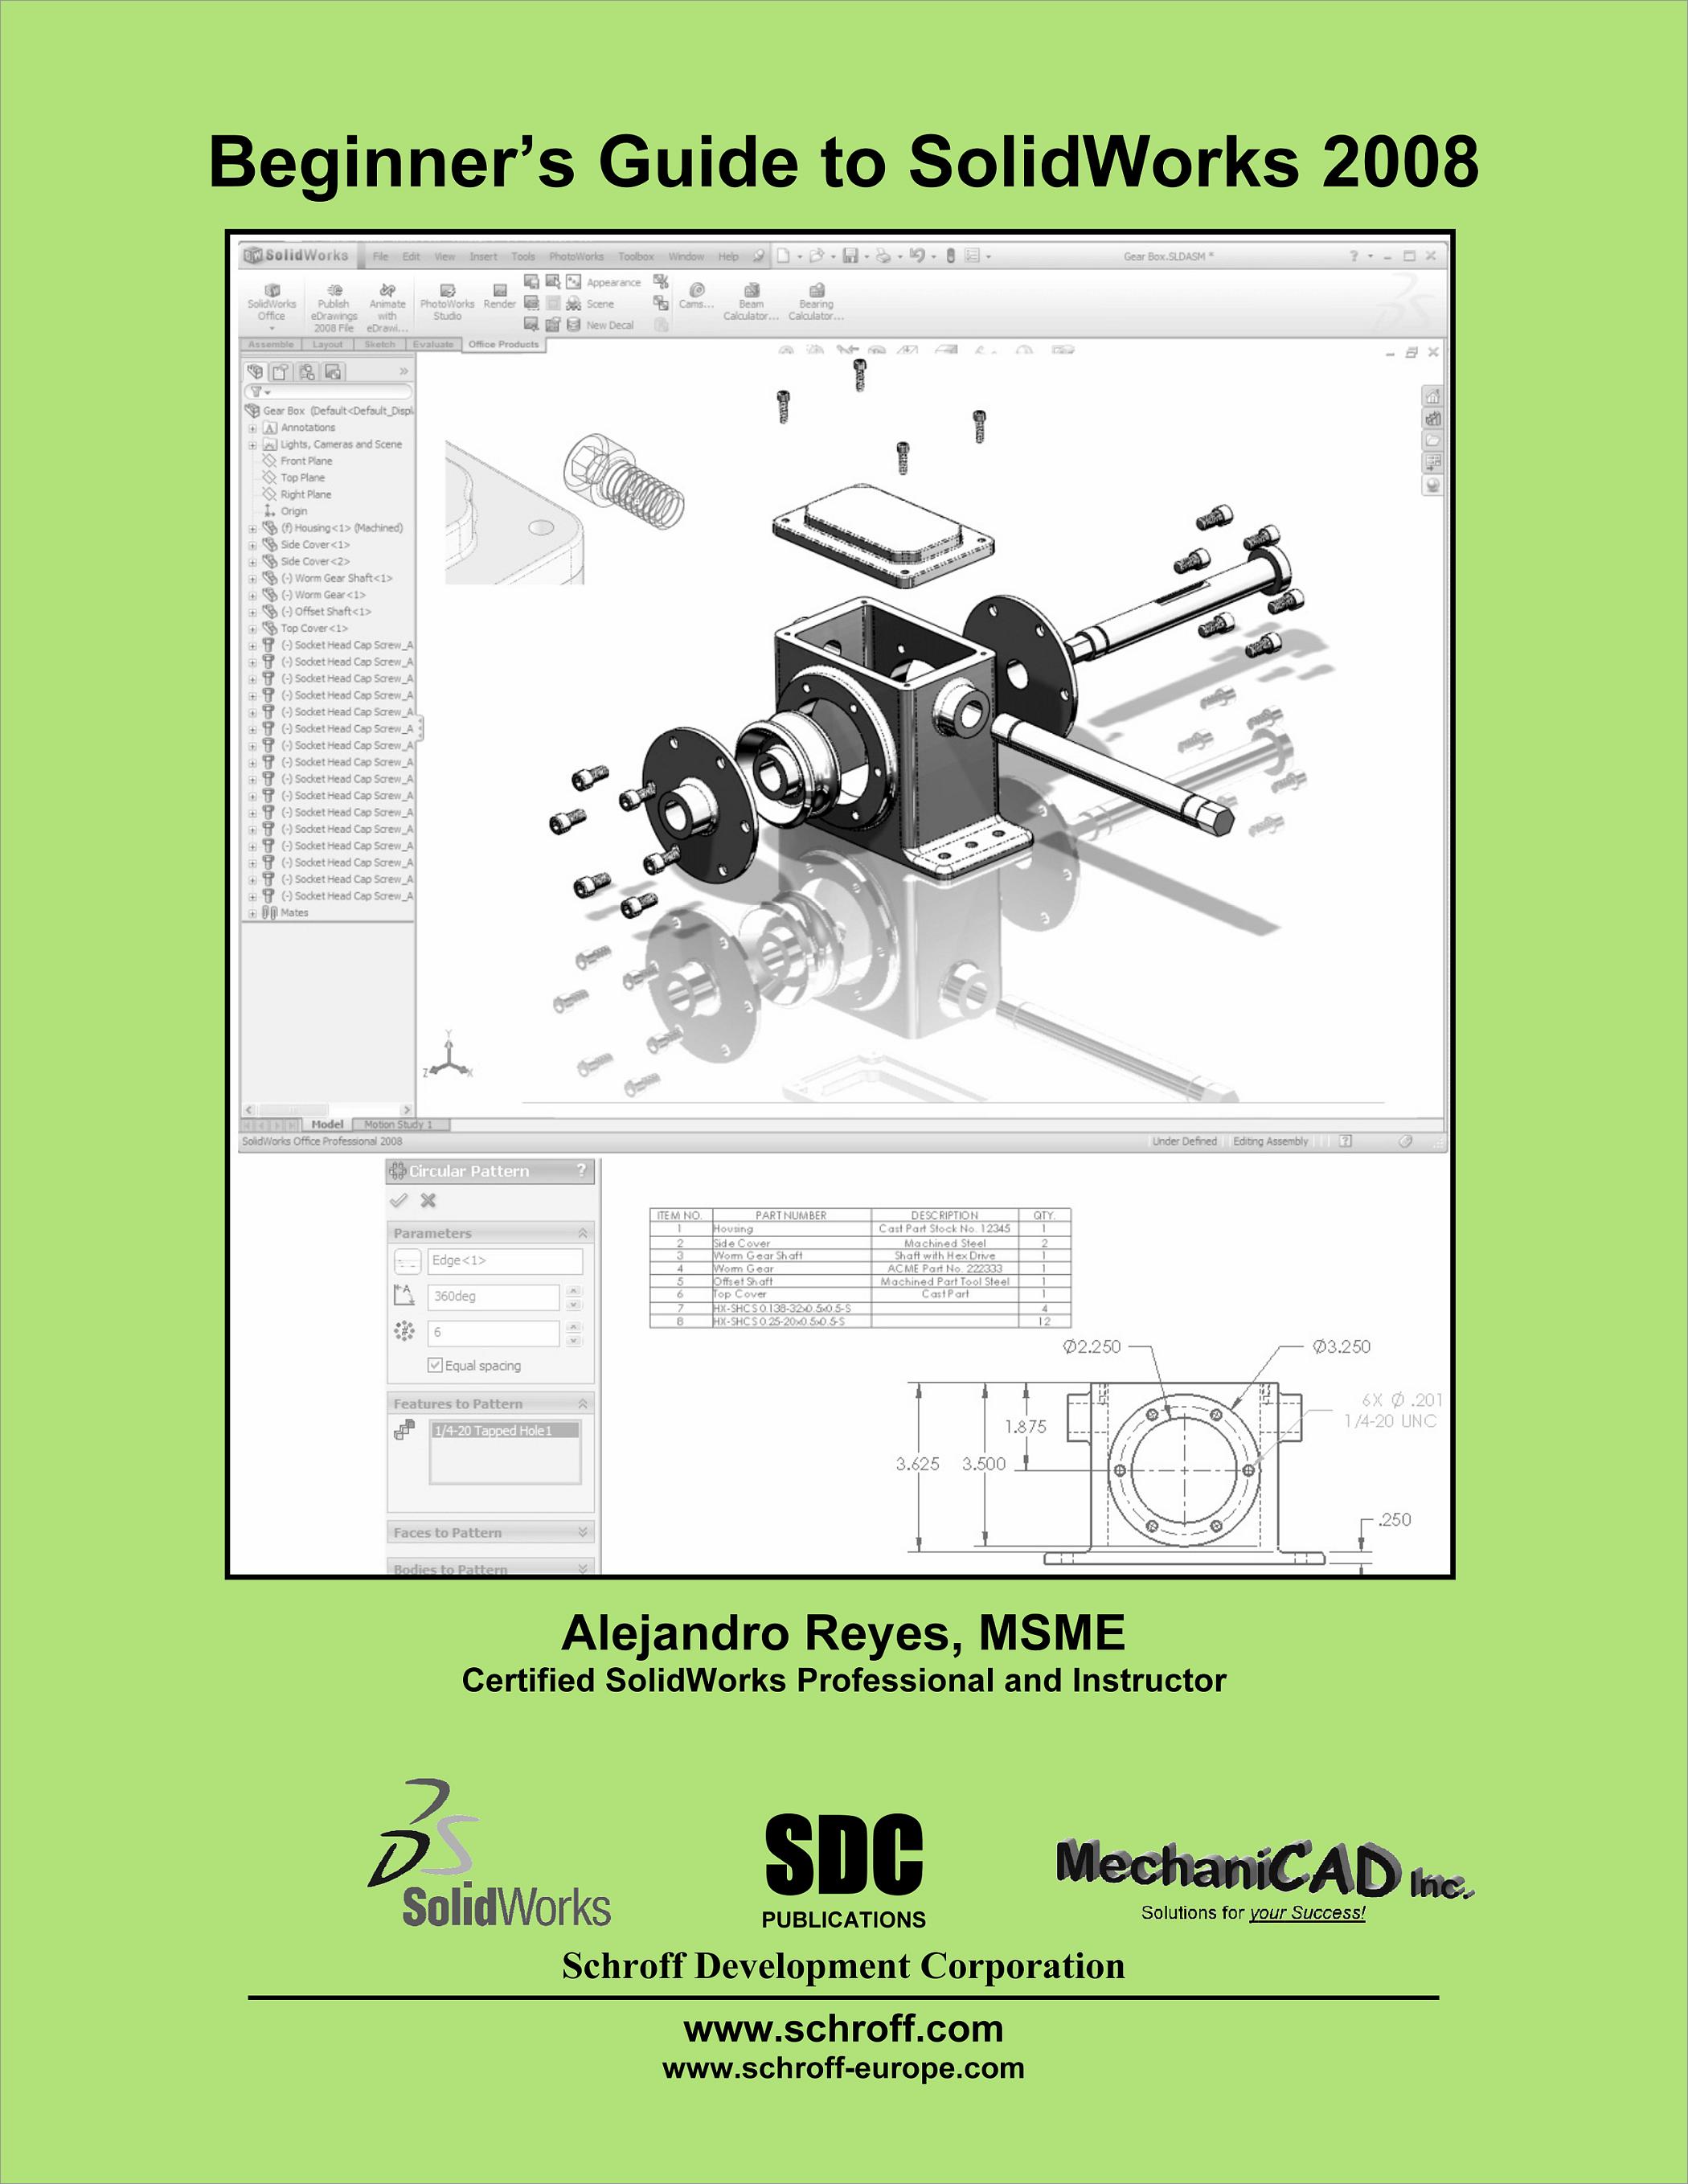 solidworks manual download files